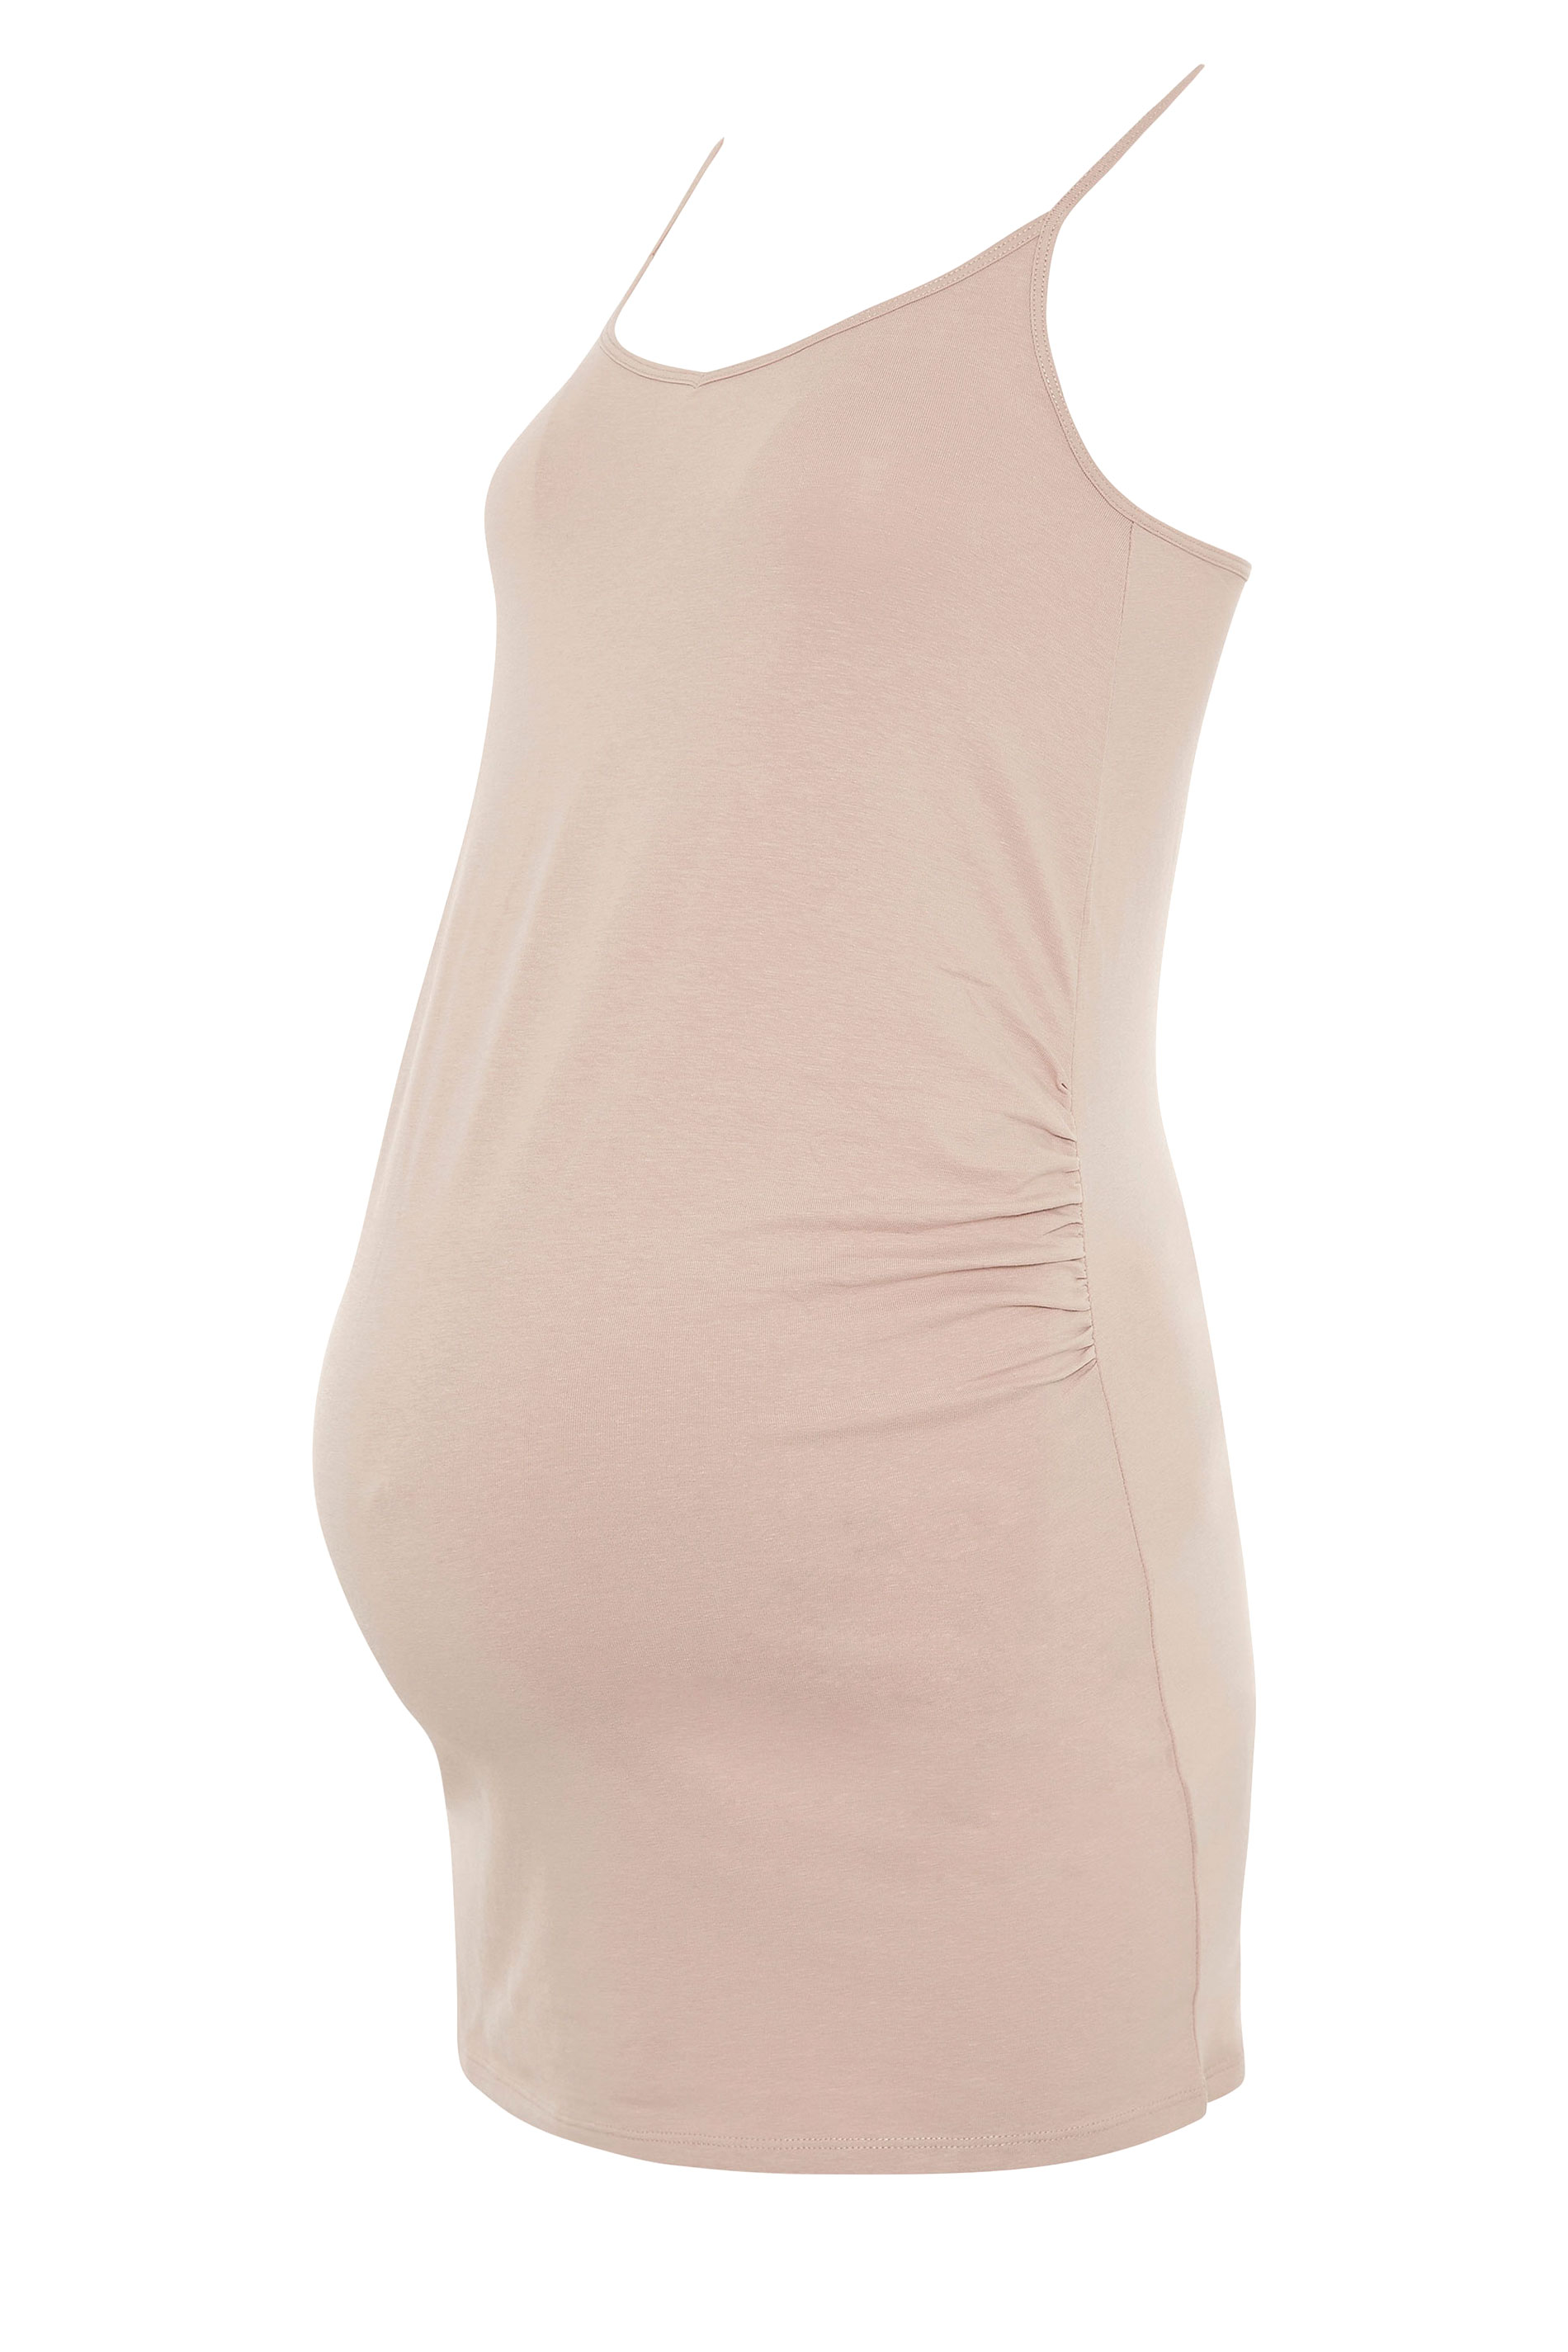 Tall Women's LTS 2 Pack Maternity Nude & White Cami Vest Tops | Long Tall Sally 3